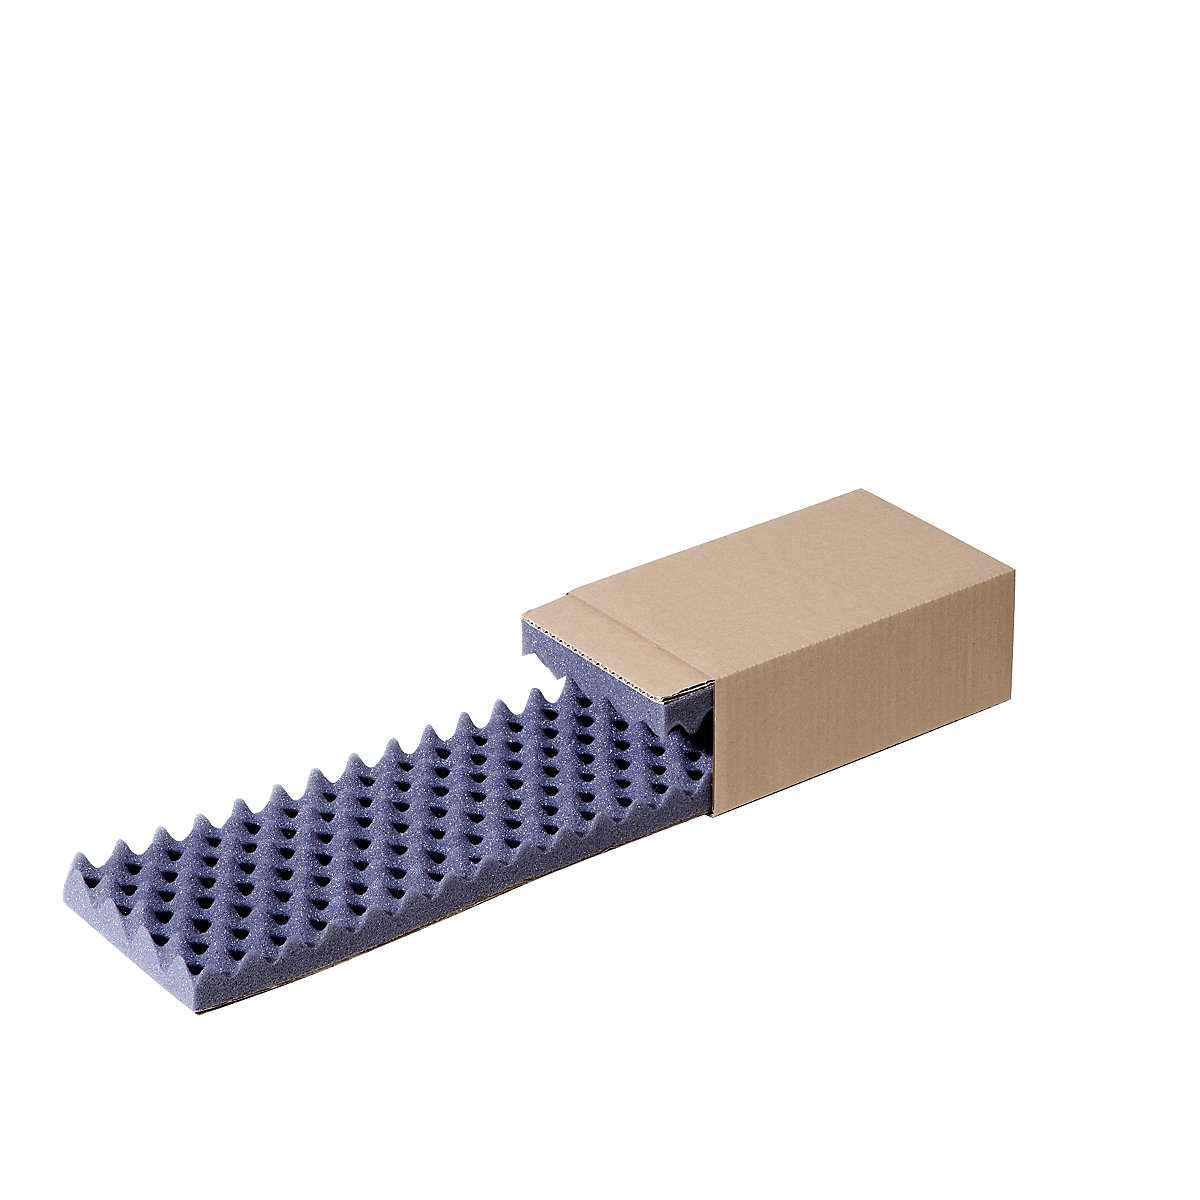 Slide boxes, internal part FEFCO 0907, external part FEFCO 0503, padded, internal dimensions 250 x 140 x 80 mm, pack of 50-7